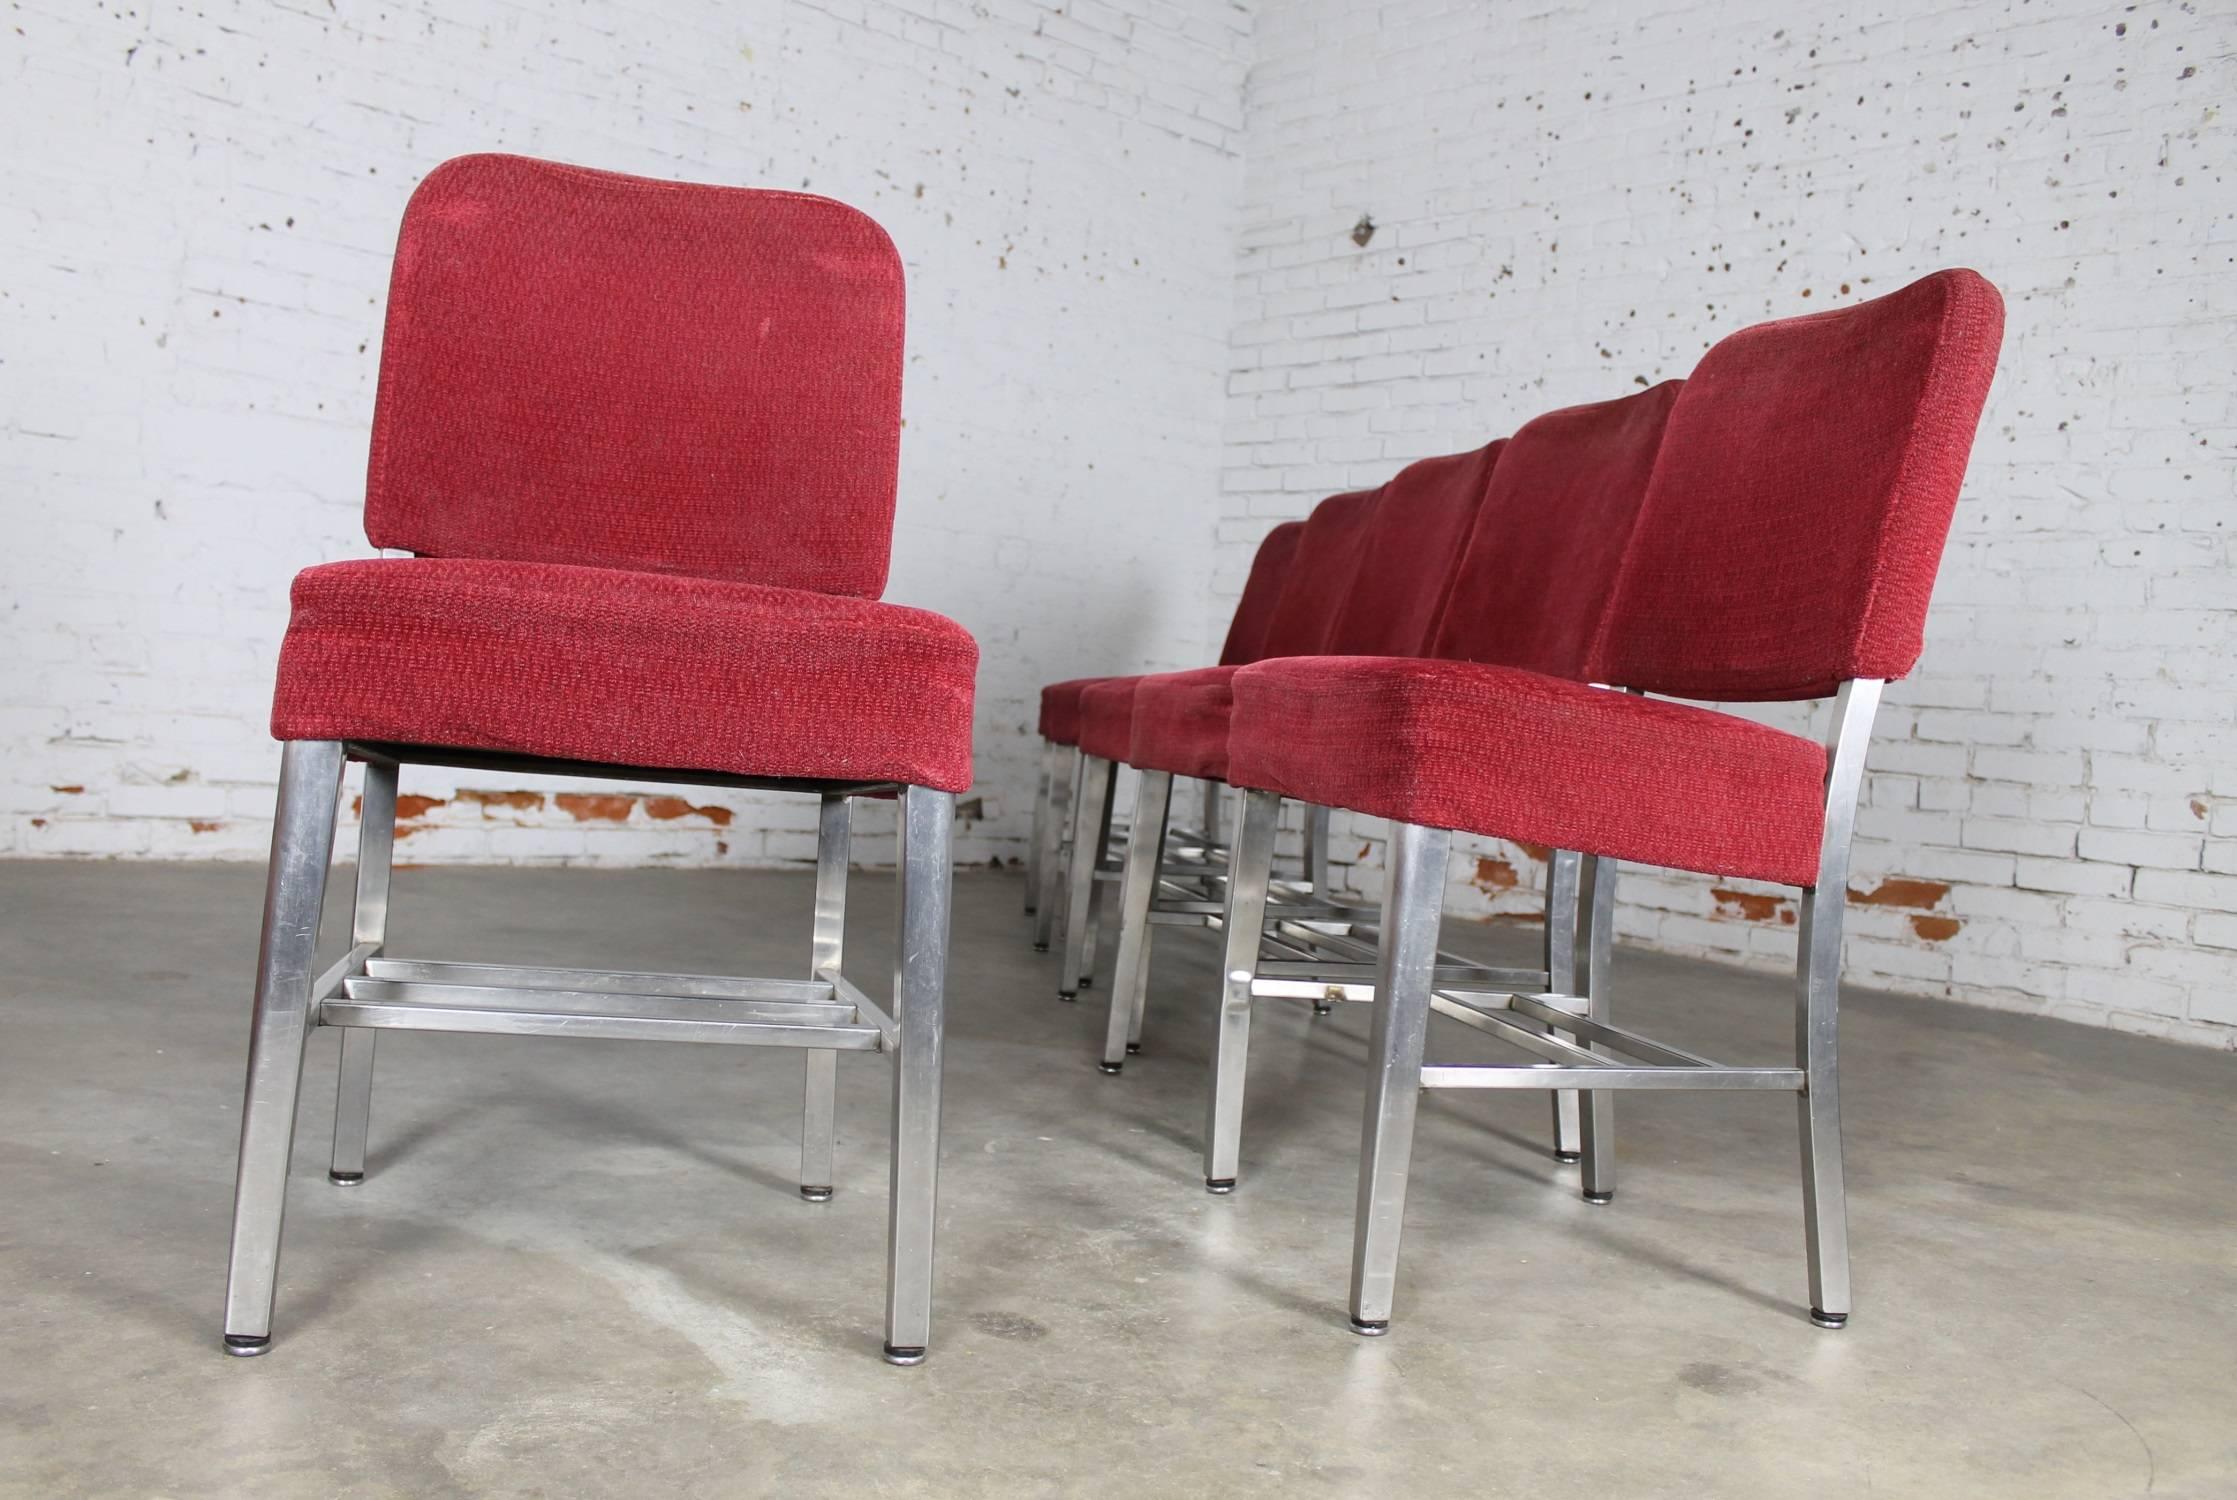 Awesome set of six Art Moderne or streamline railroad dining chairs in stainless steel and original cranberry colored frieze upholstery. Marked with Rota-Cline Coach and Car Equipment Company, Chicago, Illinois. Most likely circa 1920-1940 these